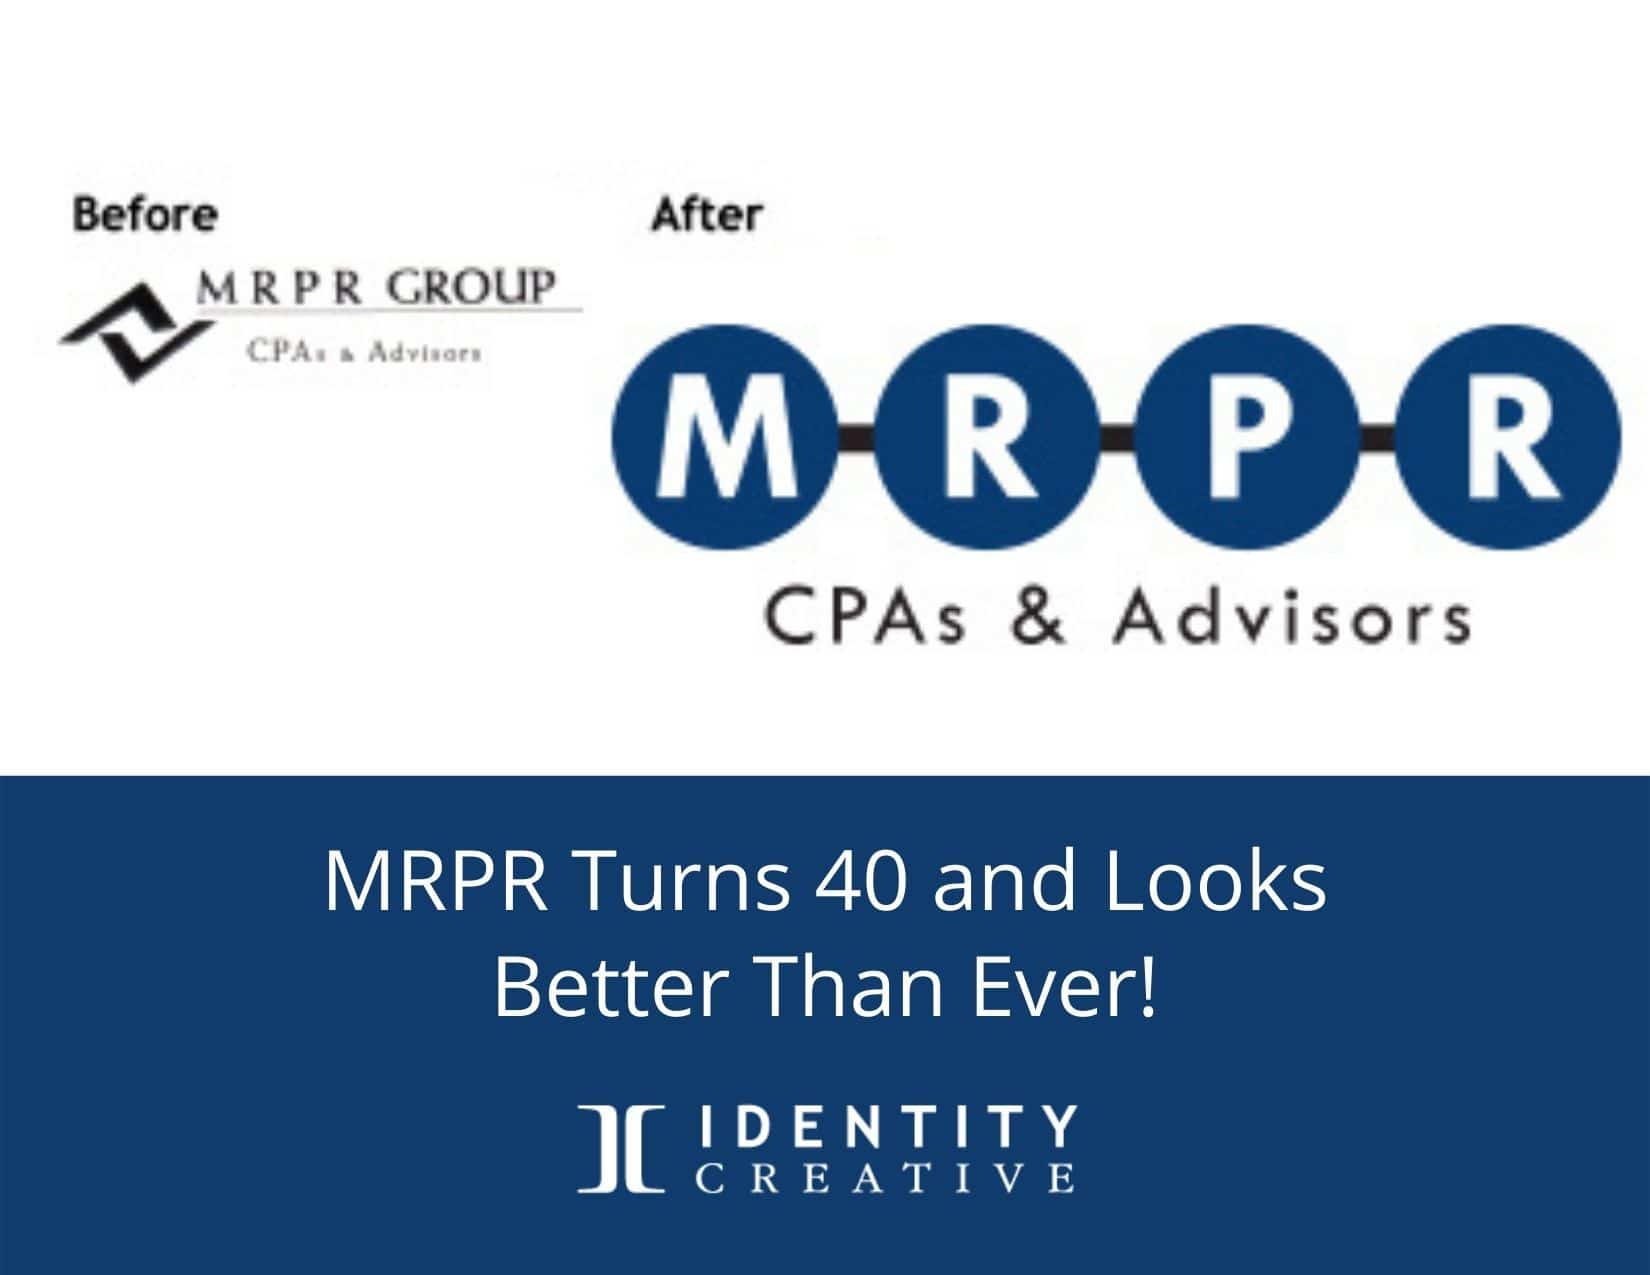 MRPR Turns 40 and Looks Better Than Ever!